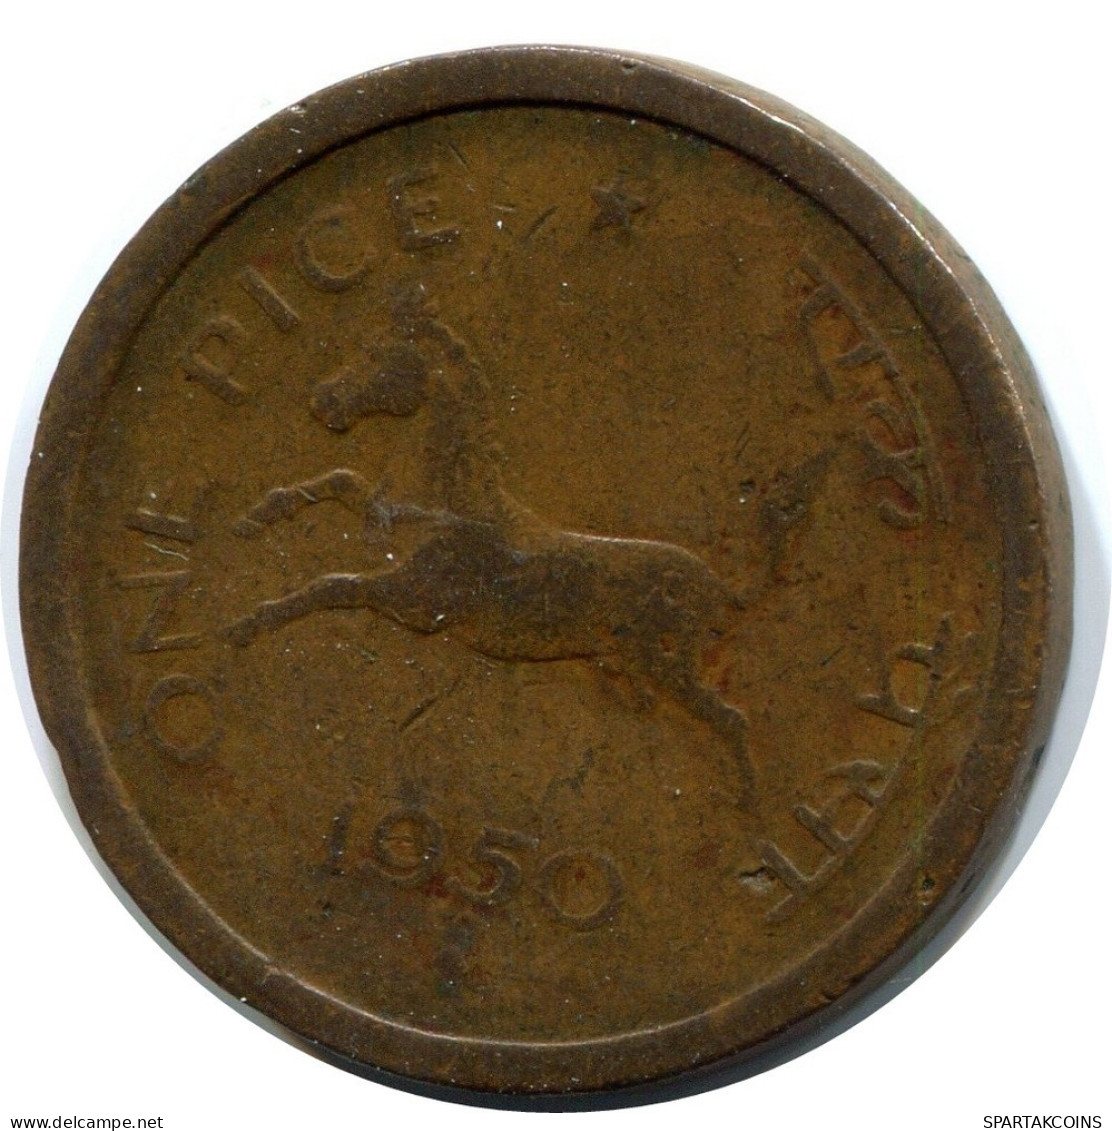 1 PICE 1950 INDIEN INDIA Münze #AY949.D.A - India